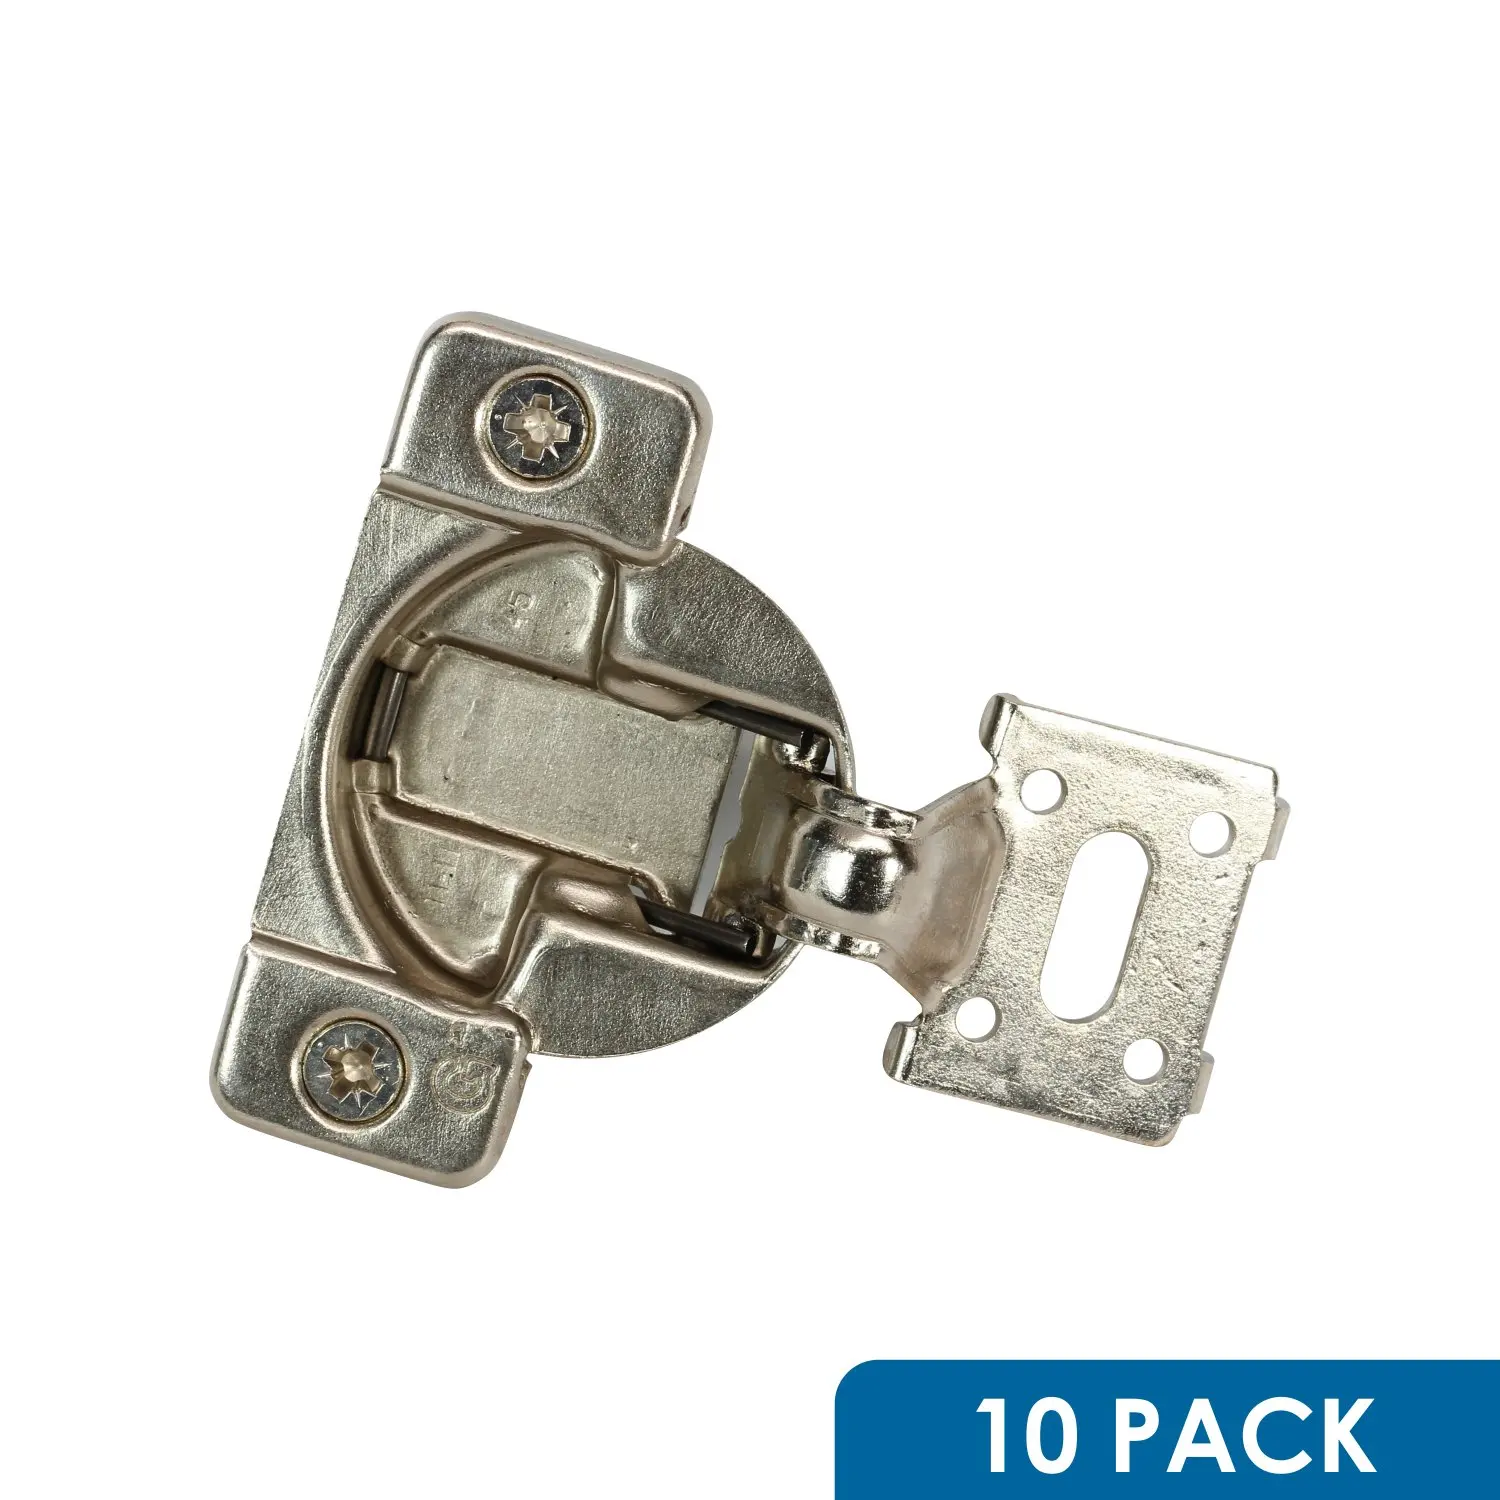 Cabinet Hinges 25x Grass 108 Deg 1 1 4 Overlay Self Close Press Compact Cabinet Hinge 02889 15 Home